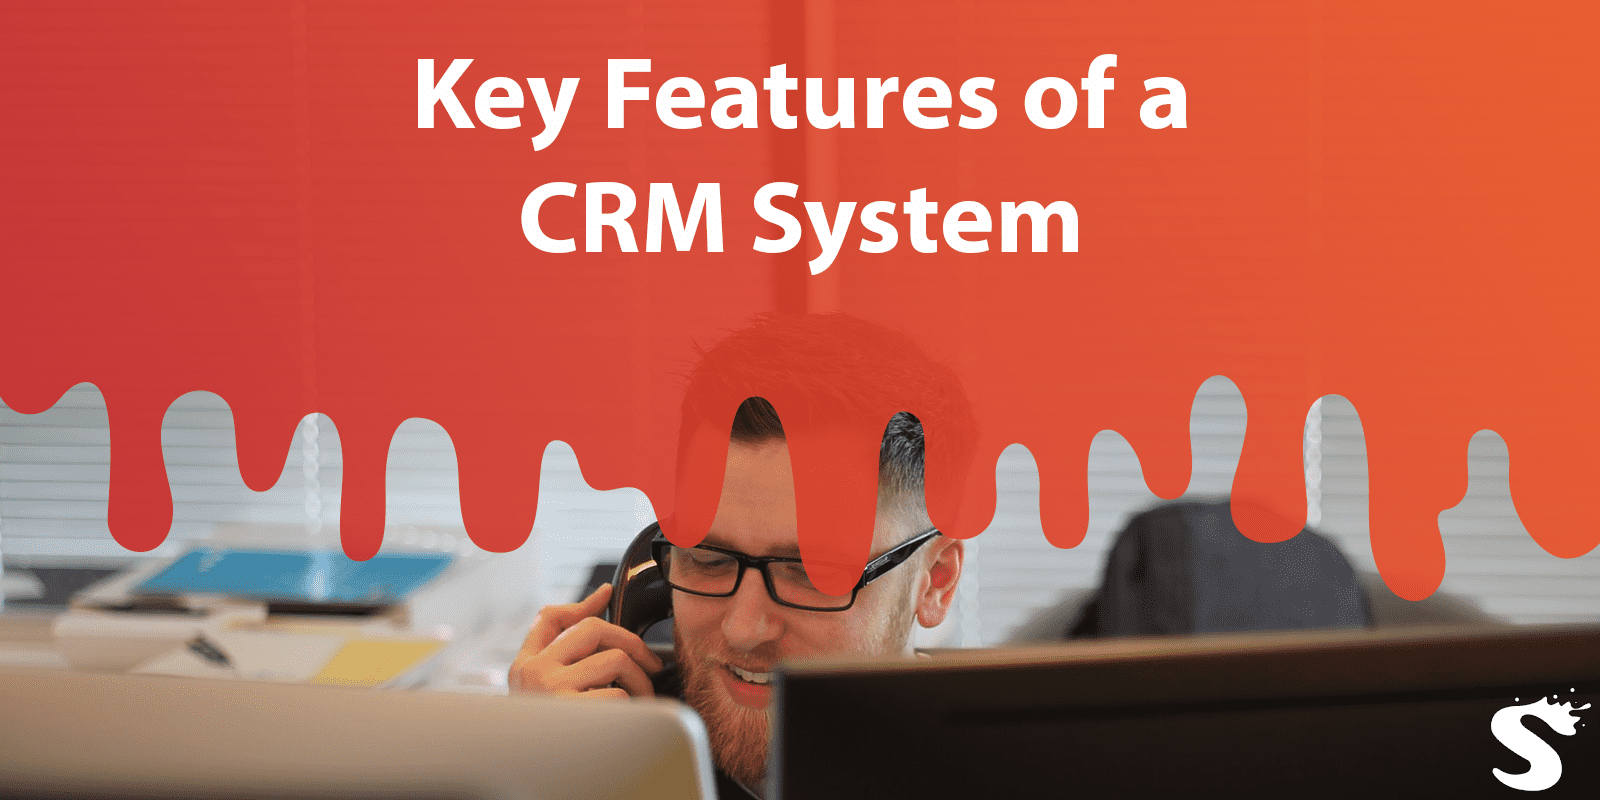 Key Features of a CRM System